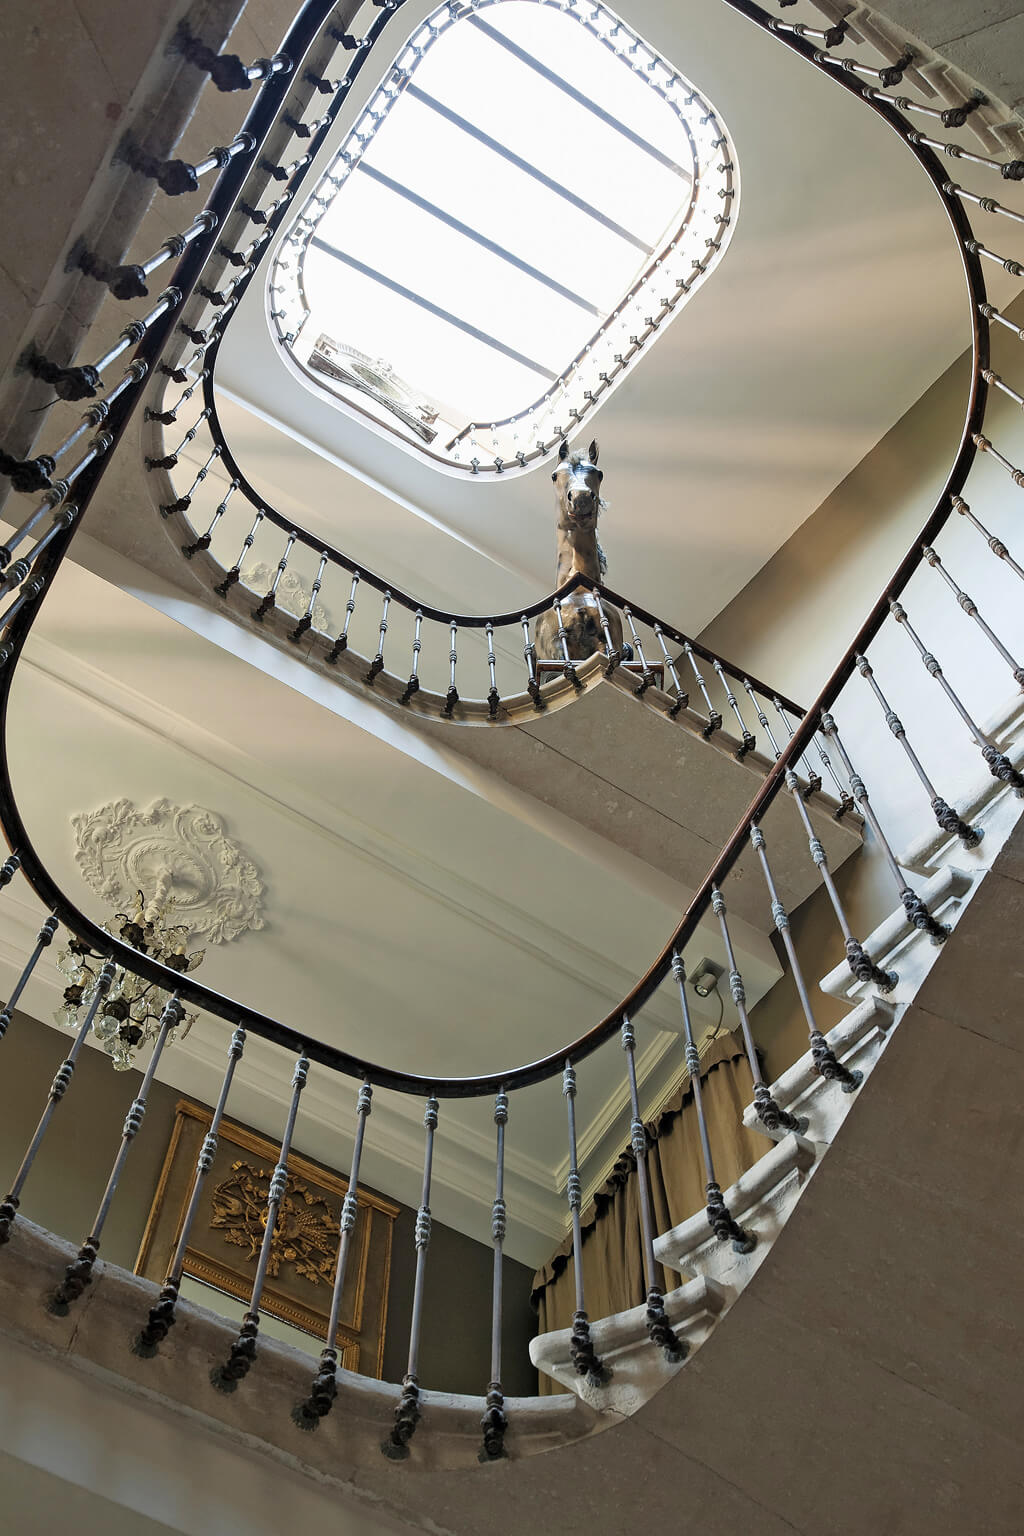 Magnificent French iron staircase. Come see a Breathtaking French Château Tour in Provence With Photo Gallery of Historical Architecture, Dramatic Eclectic Interiors & Oddities!